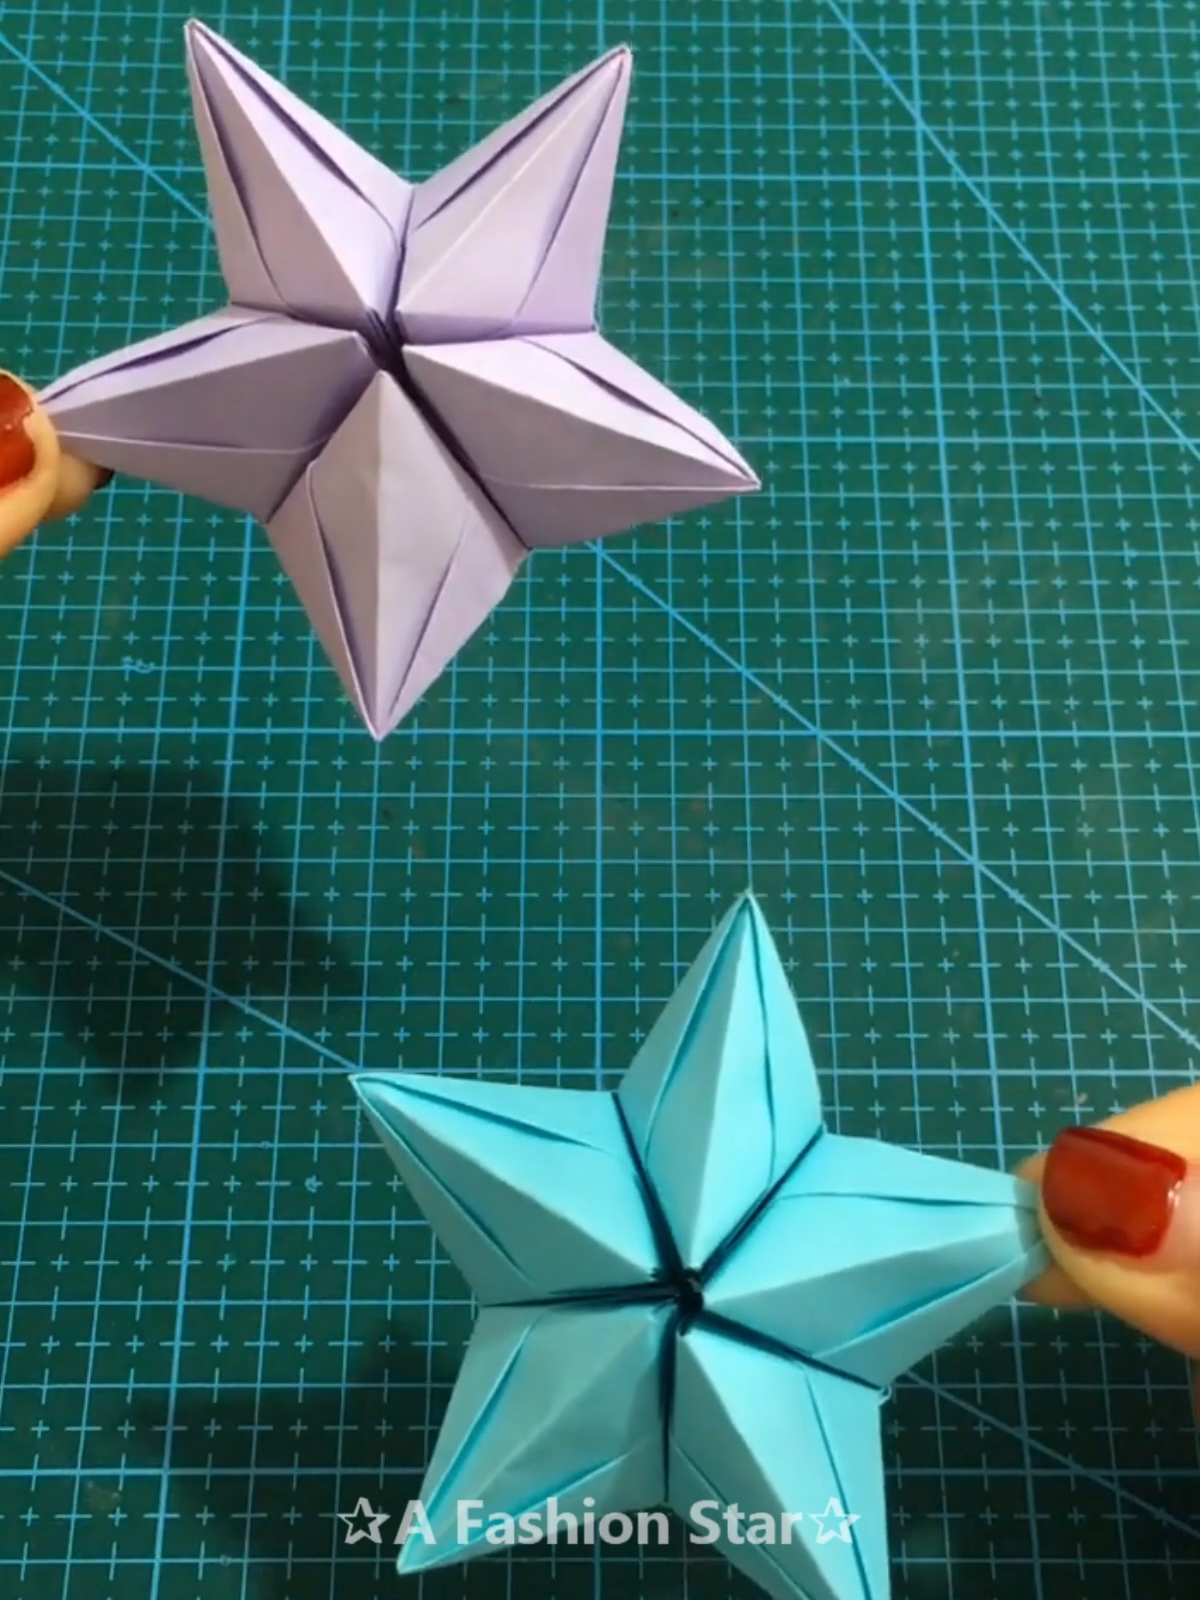 10 Easy Paper Craft Ideas – DIY For Kids - Paper Stars Idea -   14 diy projects Paper decoration ideas